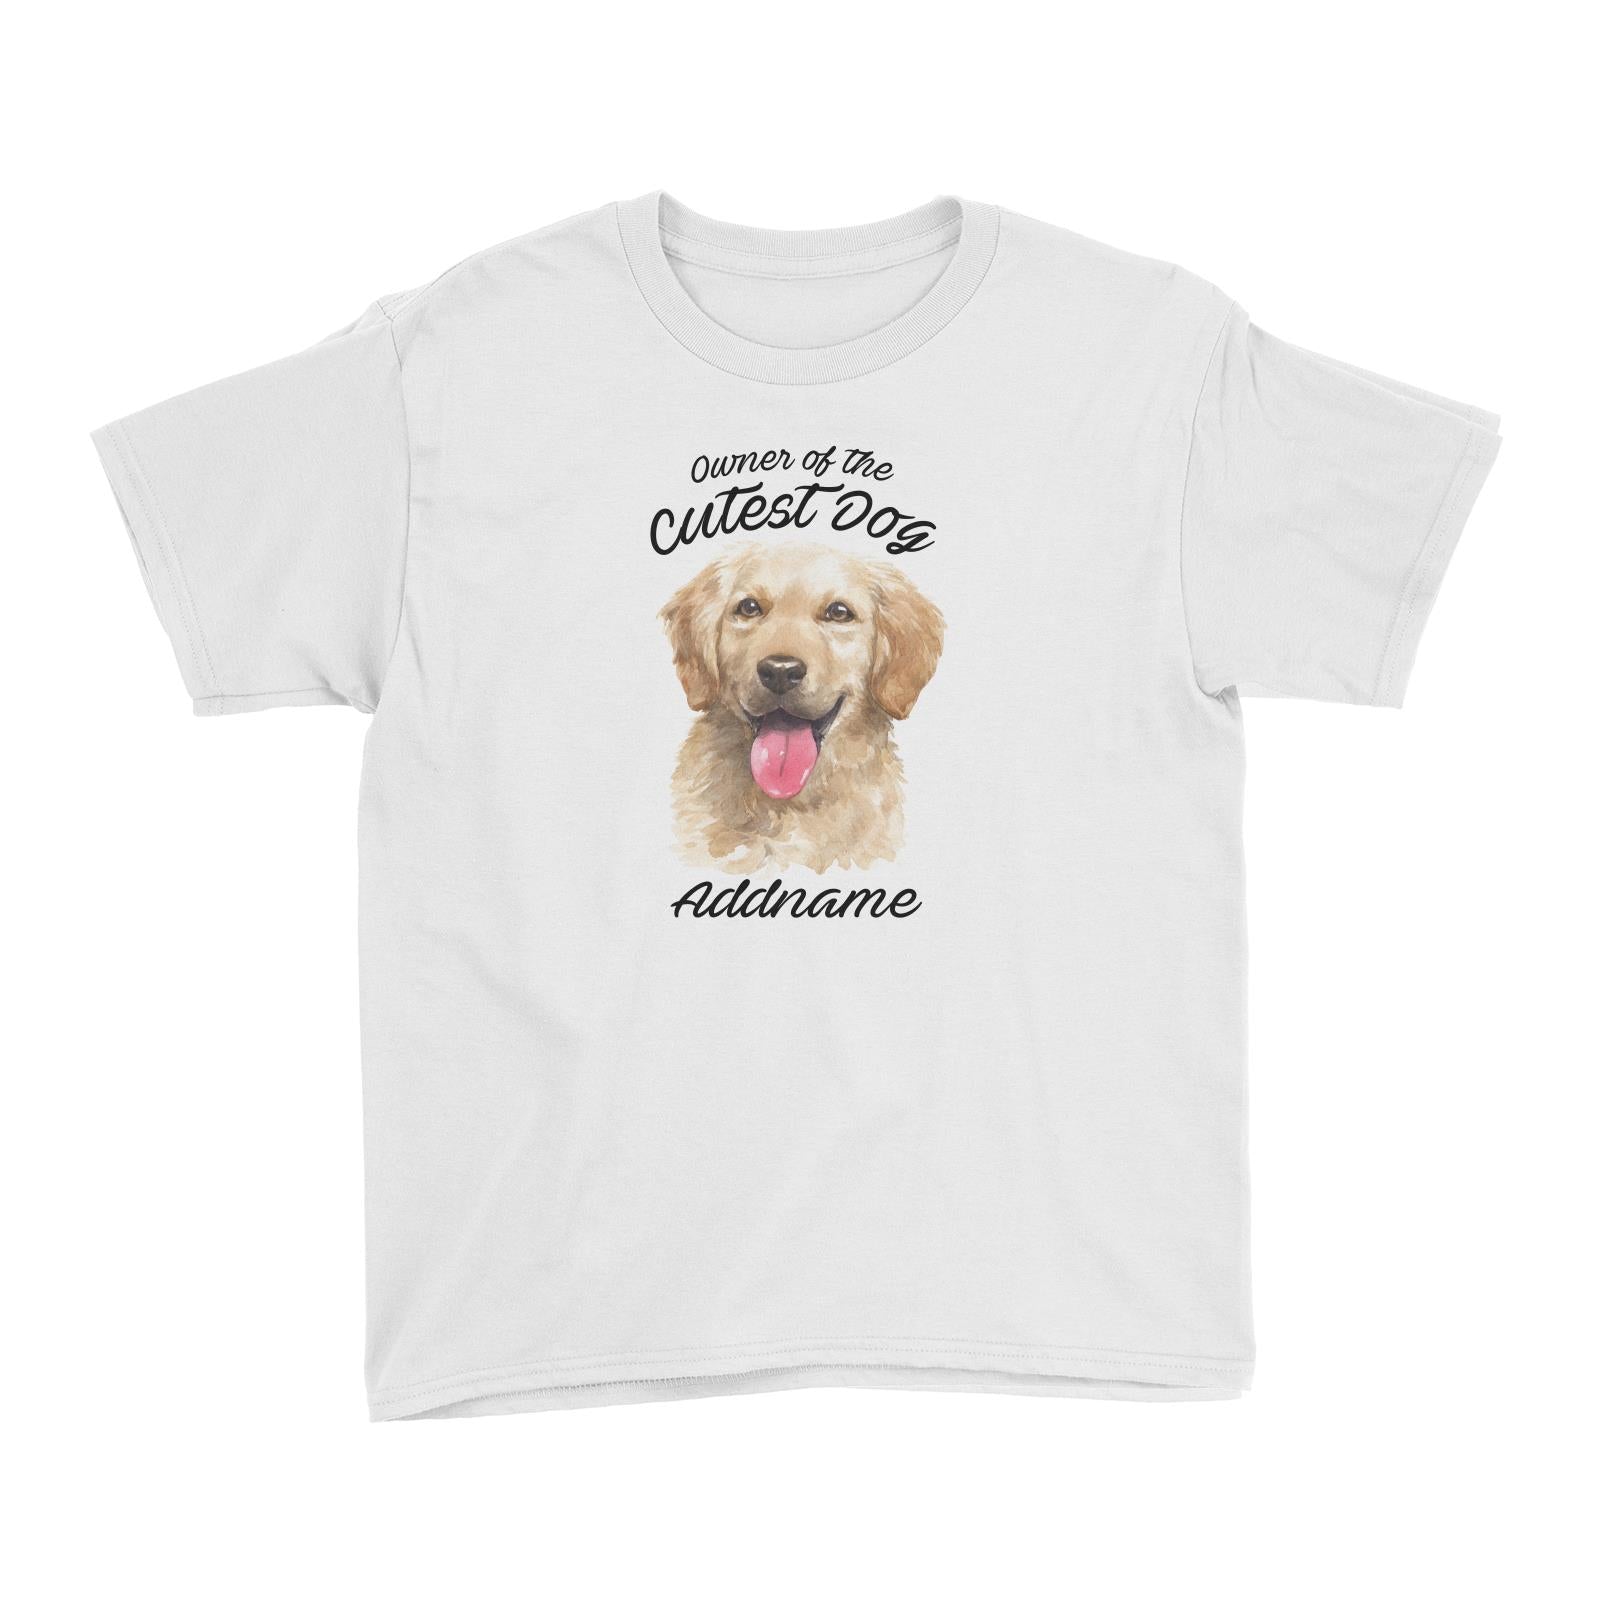 Watercolor Dog Owner Of The Cutest Dog Golden Retriever Front Addname Kid's T-Shirt